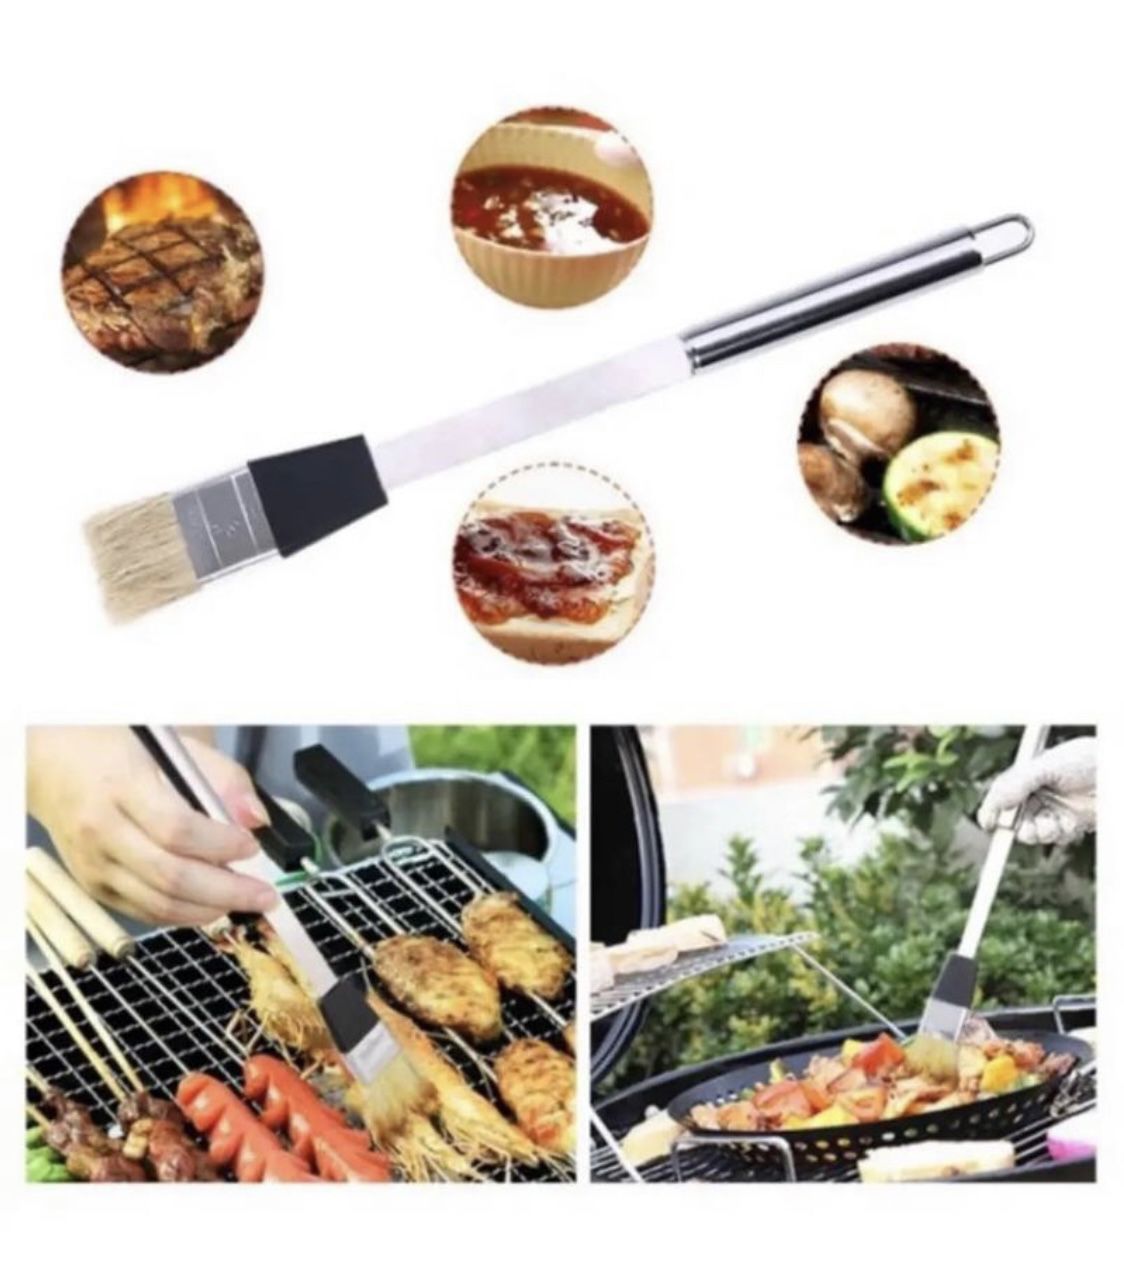 BBQ Grill Tools Set,Discoball Stainless Steel Utensils